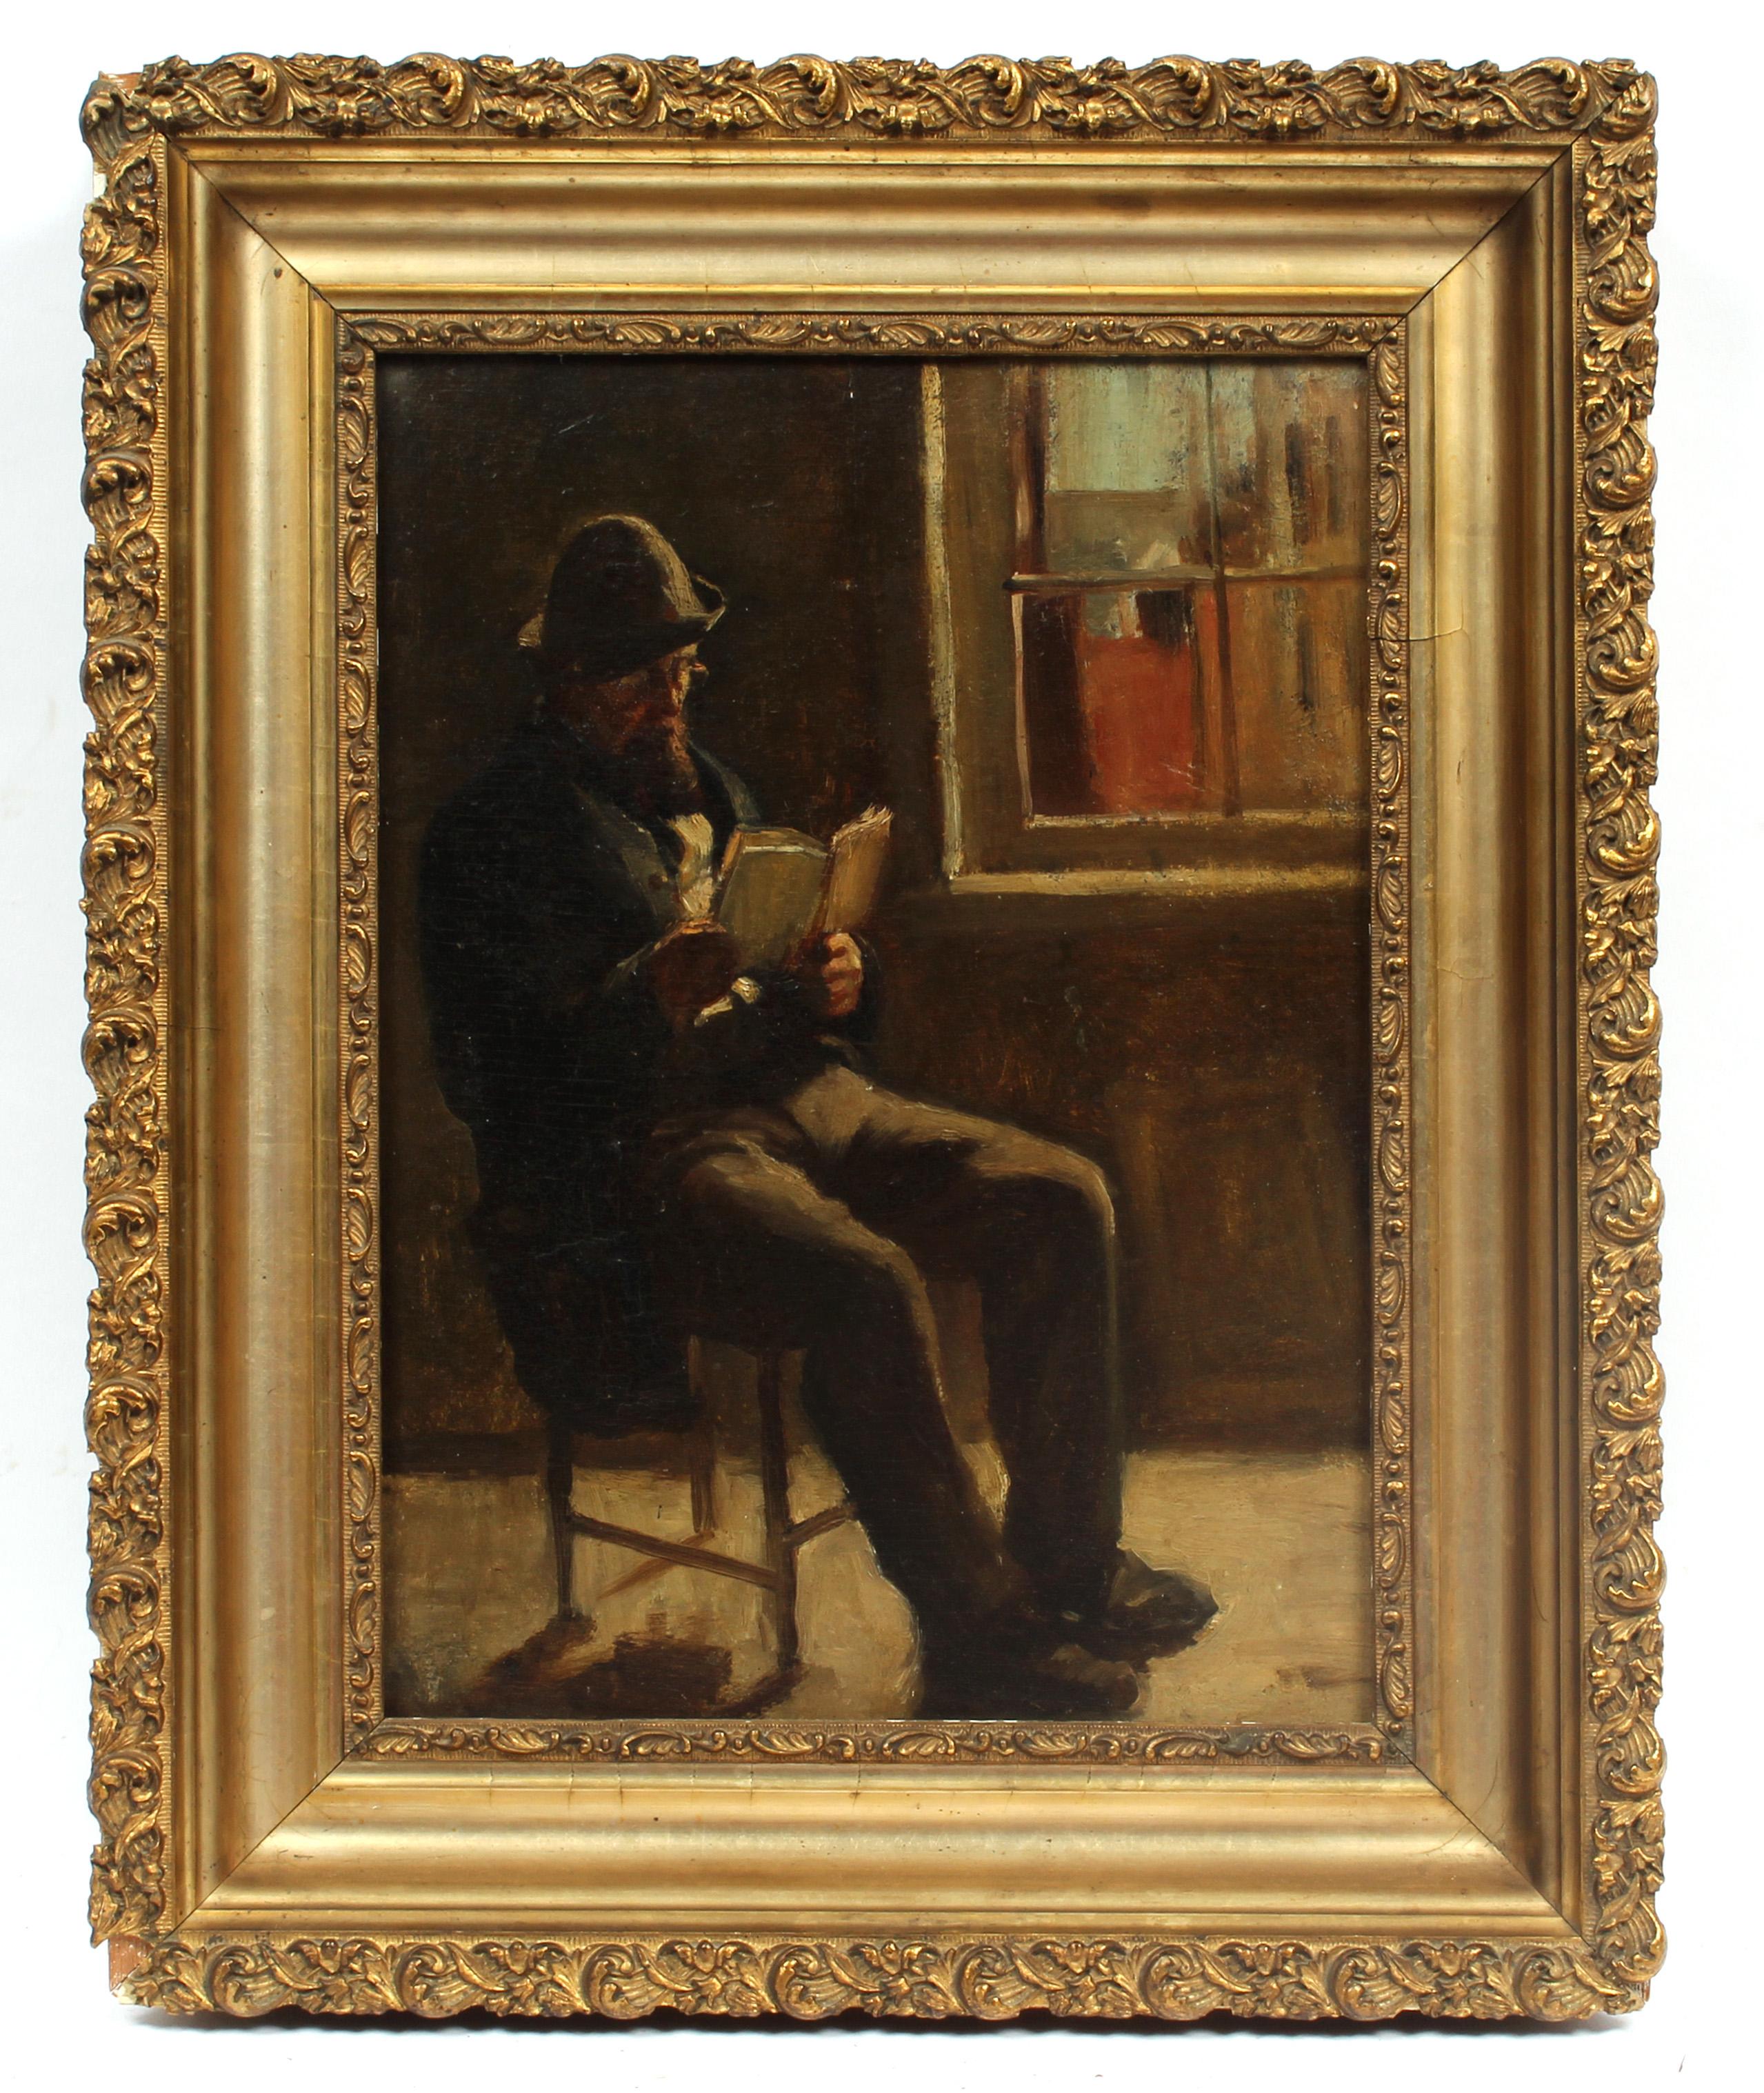 Unknown Interior Painting - Ashcan School Oil Painting Portrait Man Interior Cityscape Gold Framed New York